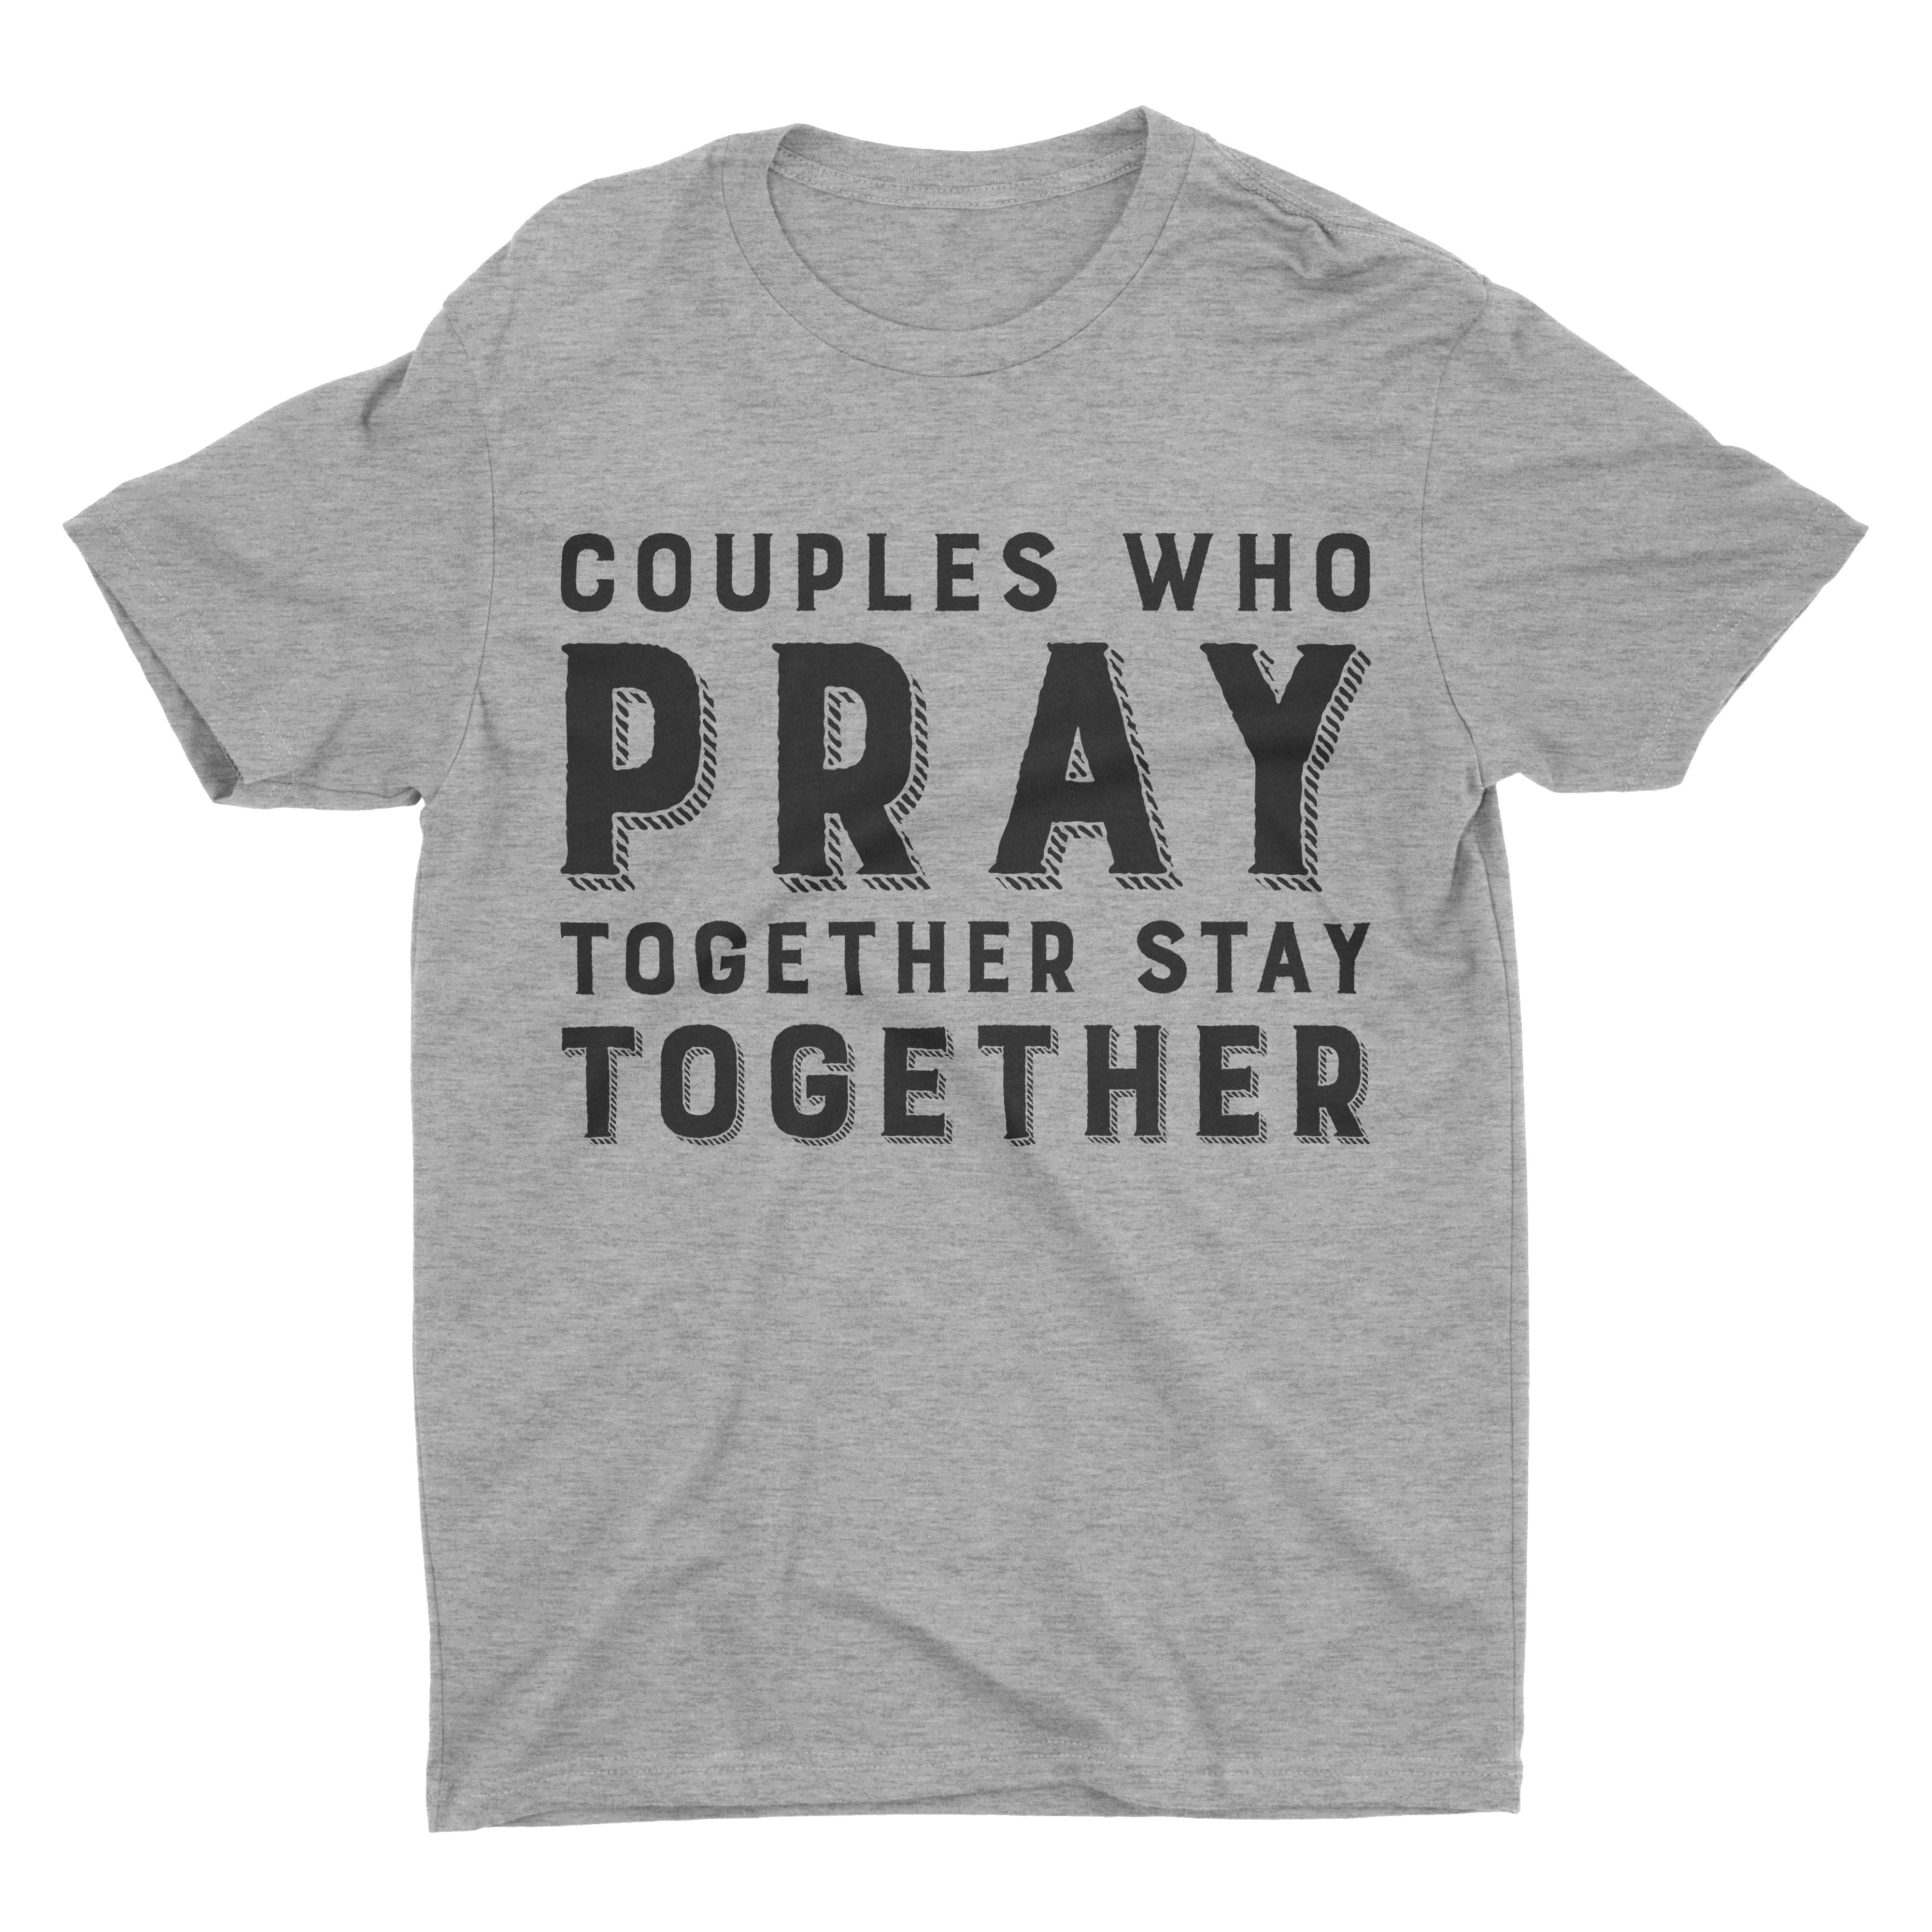 Couples Who Pray Together Stay Together -Two t-shirts for one price!